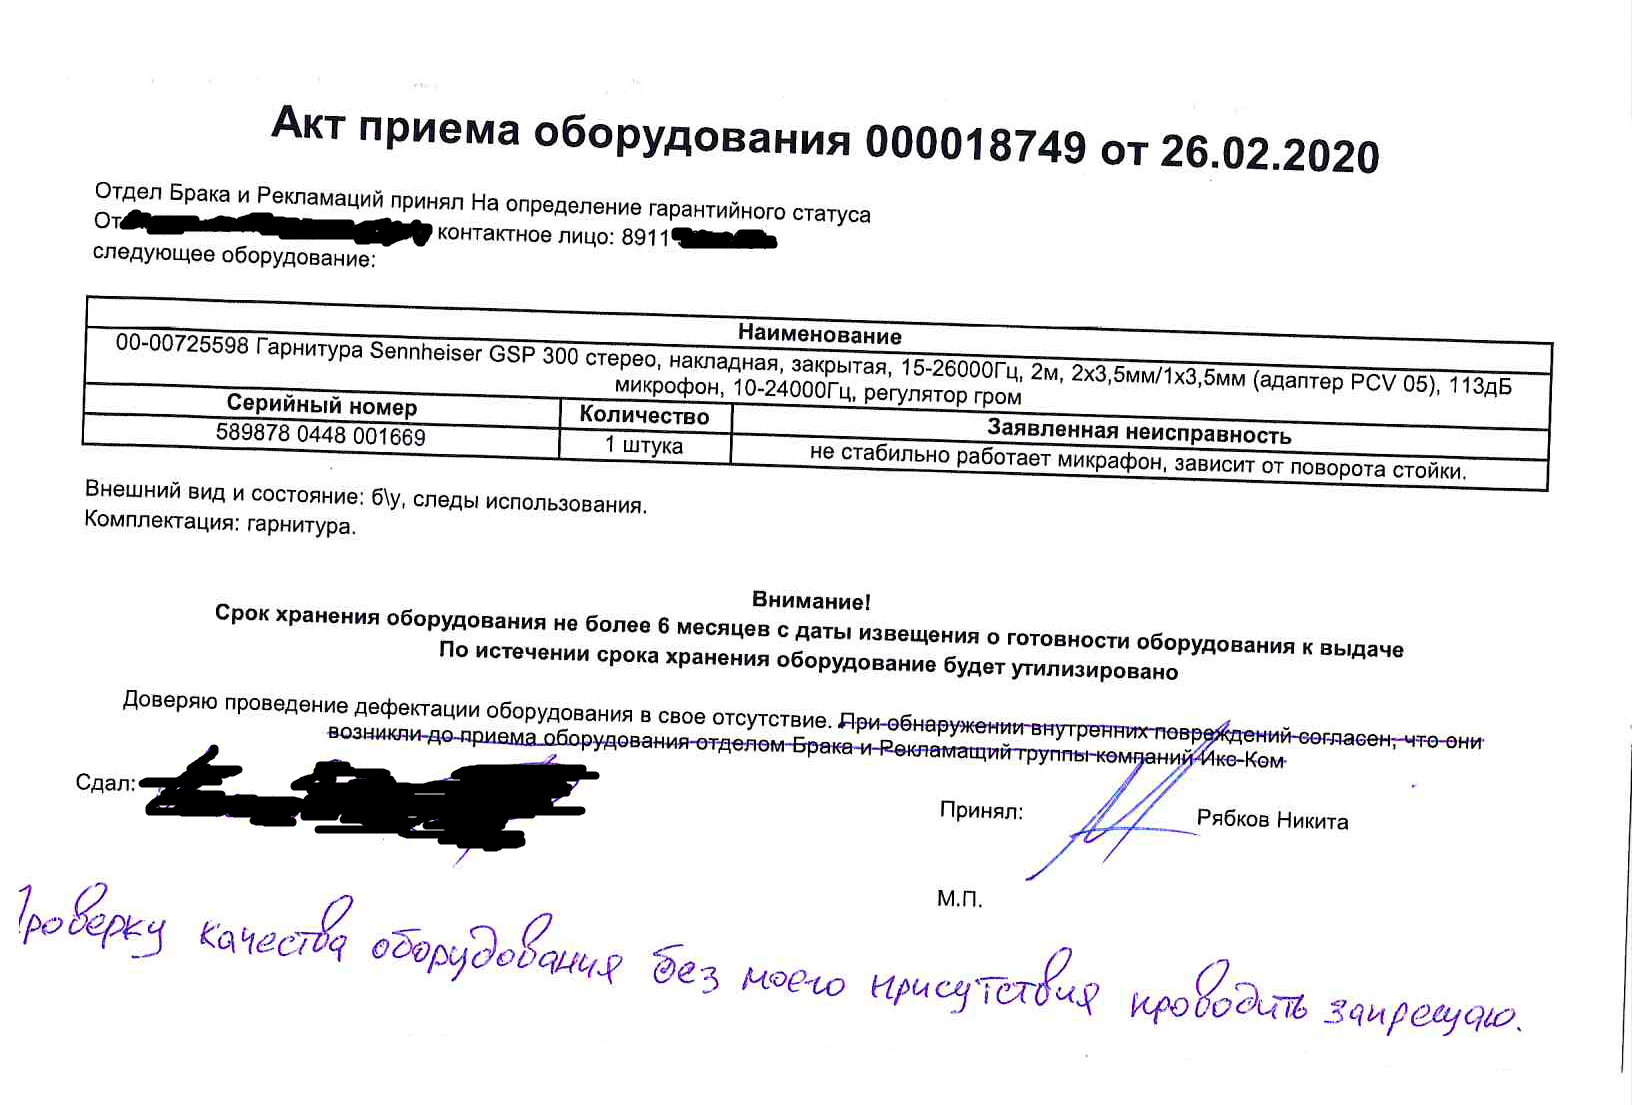 Reply to the post “The DNS store together with the DNS service center is fraudulently voiding the warranty” - My, Guarantee, Rospotrebnadzor, Service center, Asc, Negative, Consumer rights Protection, Reply to post, Longpost